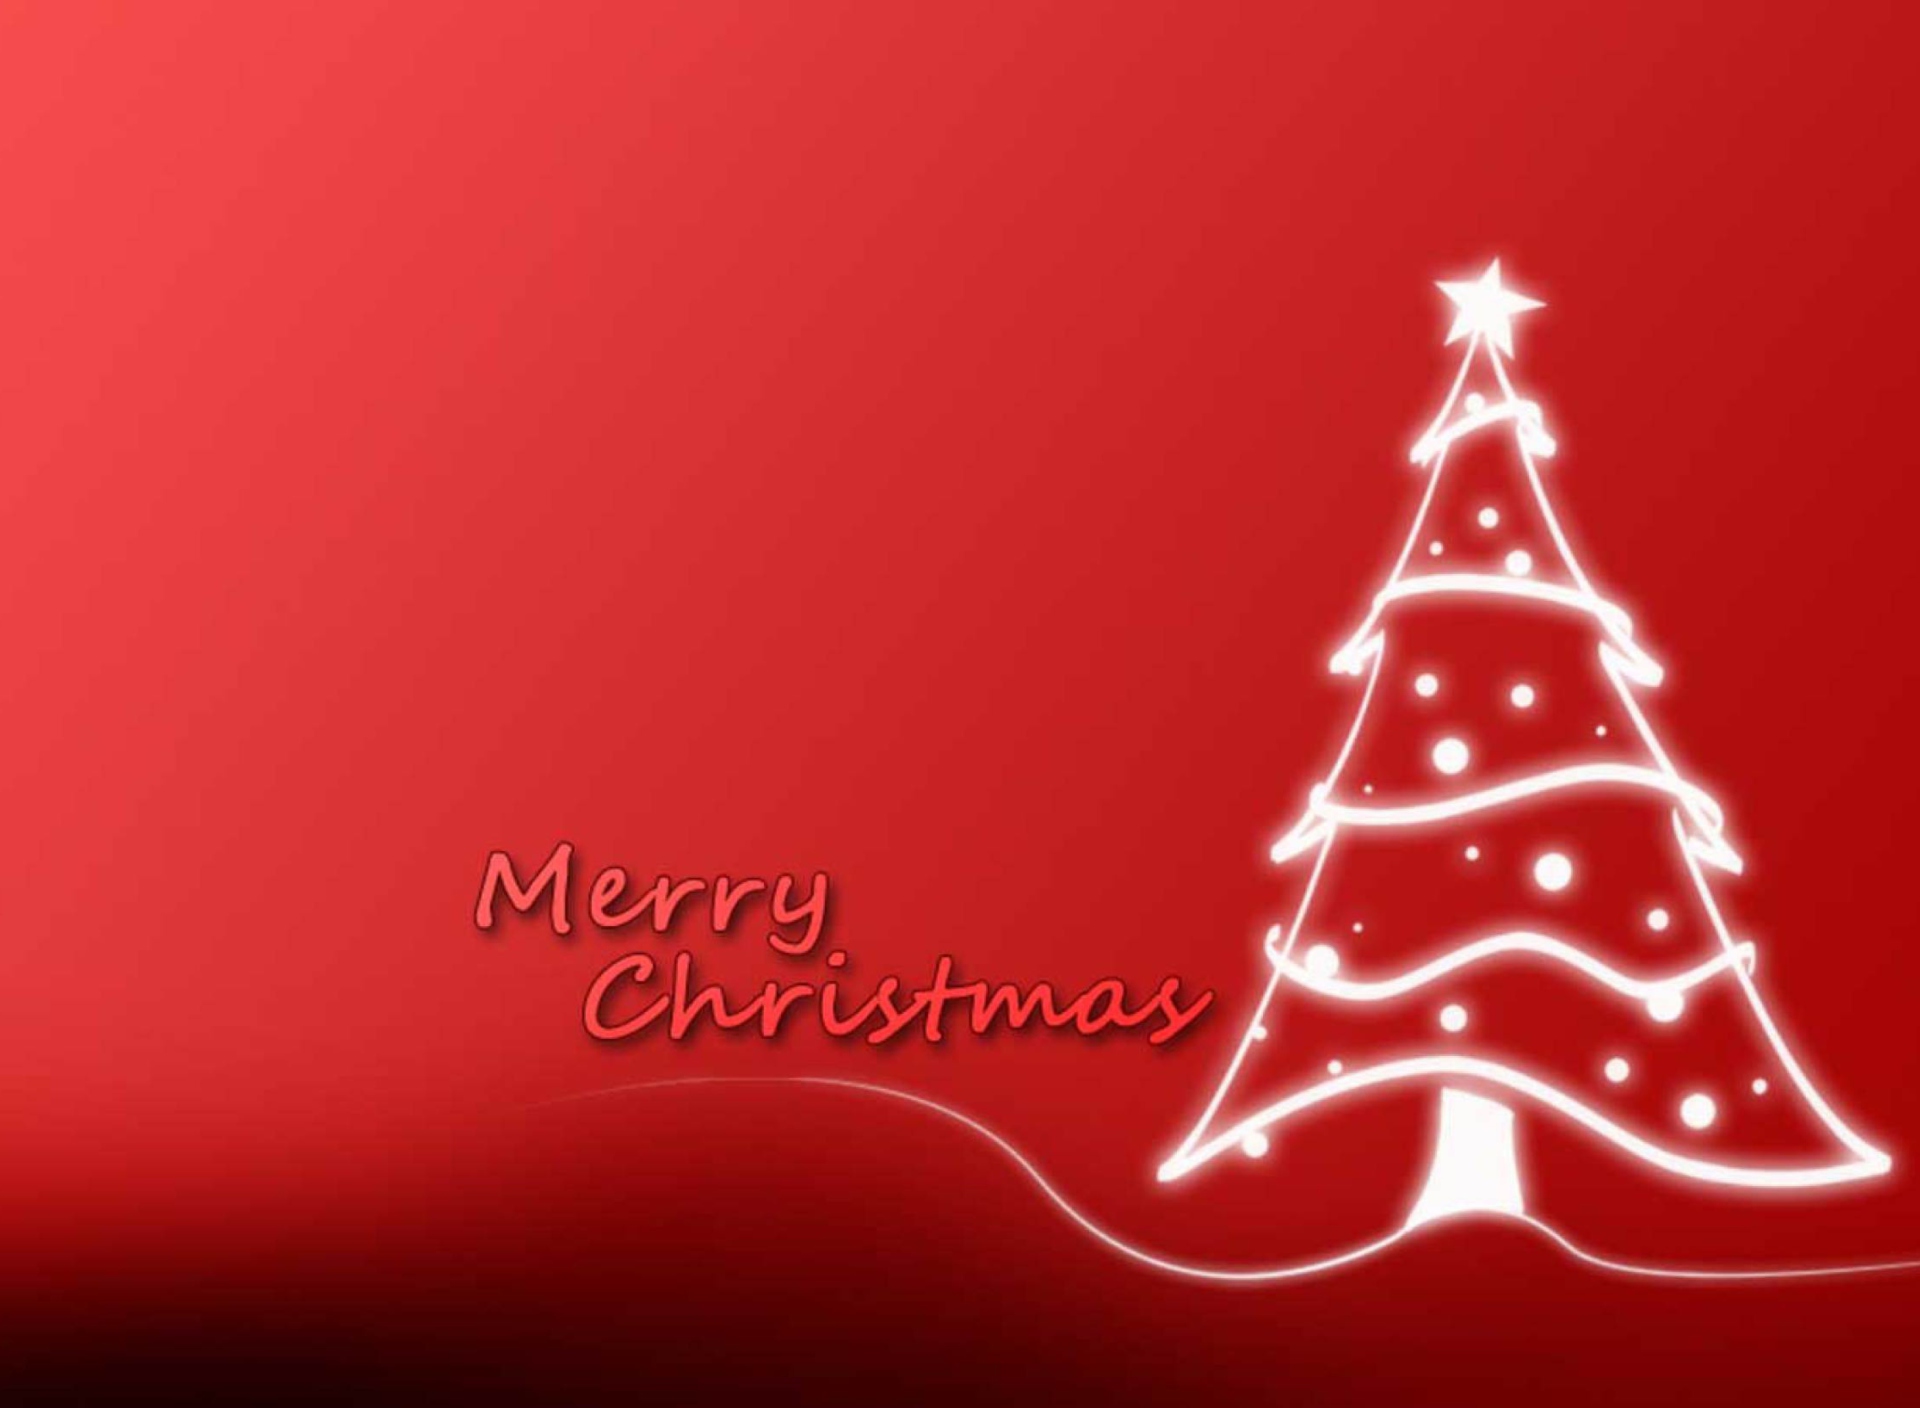 Christmas Red And White Tree wallpaper 1920x1408